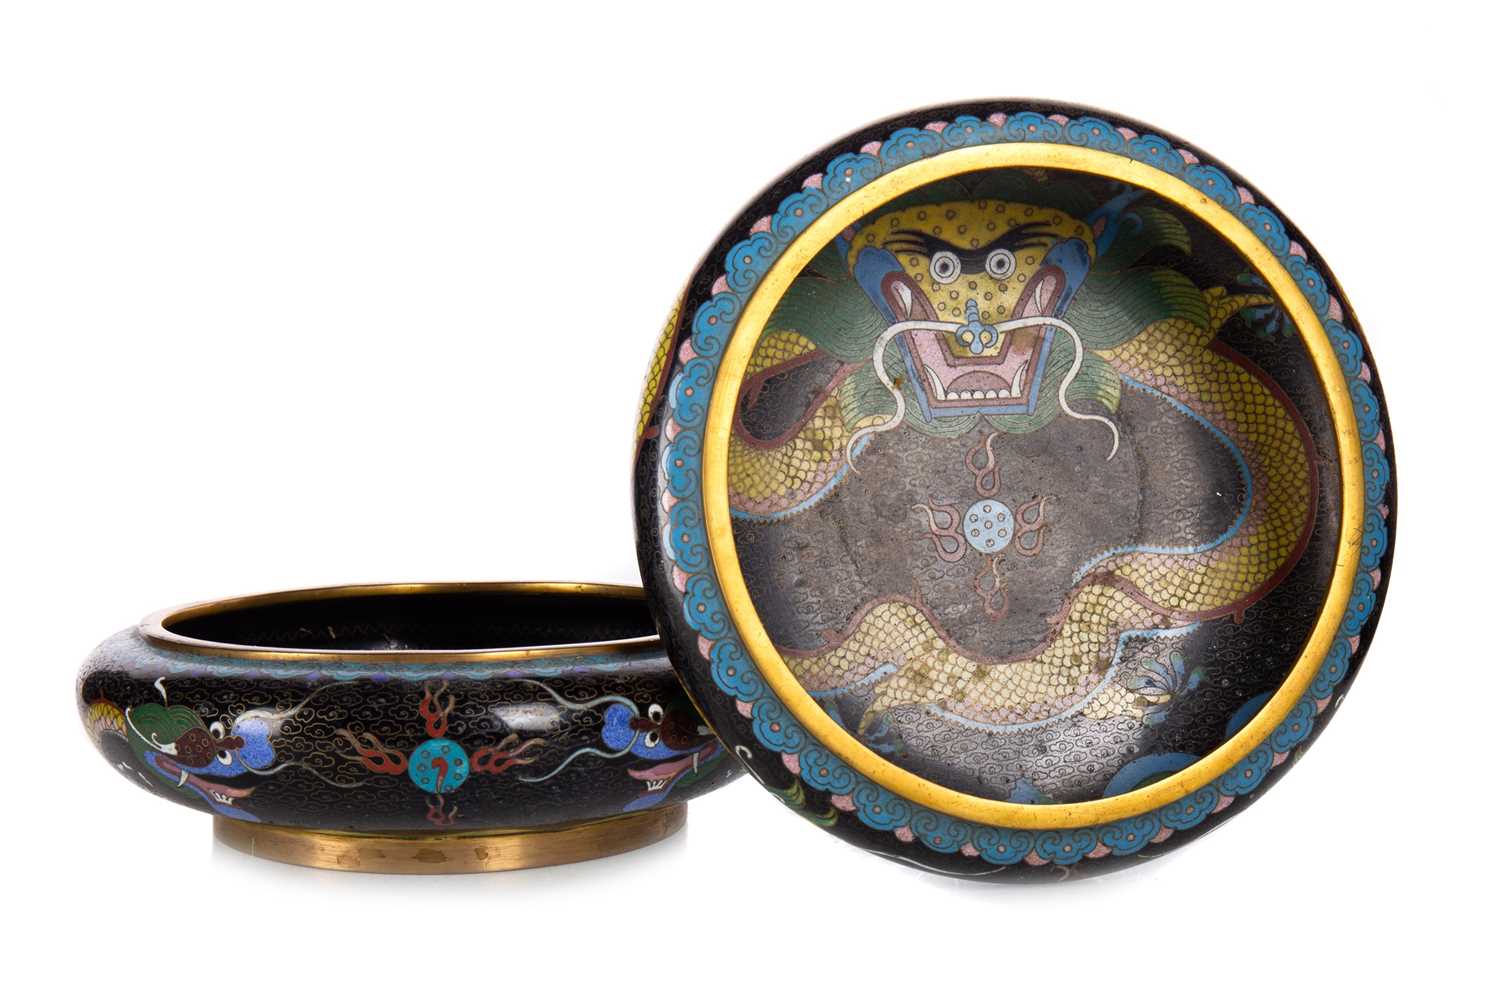 PAIR OF CHINESE CLOISONNE CIRCULAR BOWLS, LATE 19TH CENTURY - Image 2 of 17